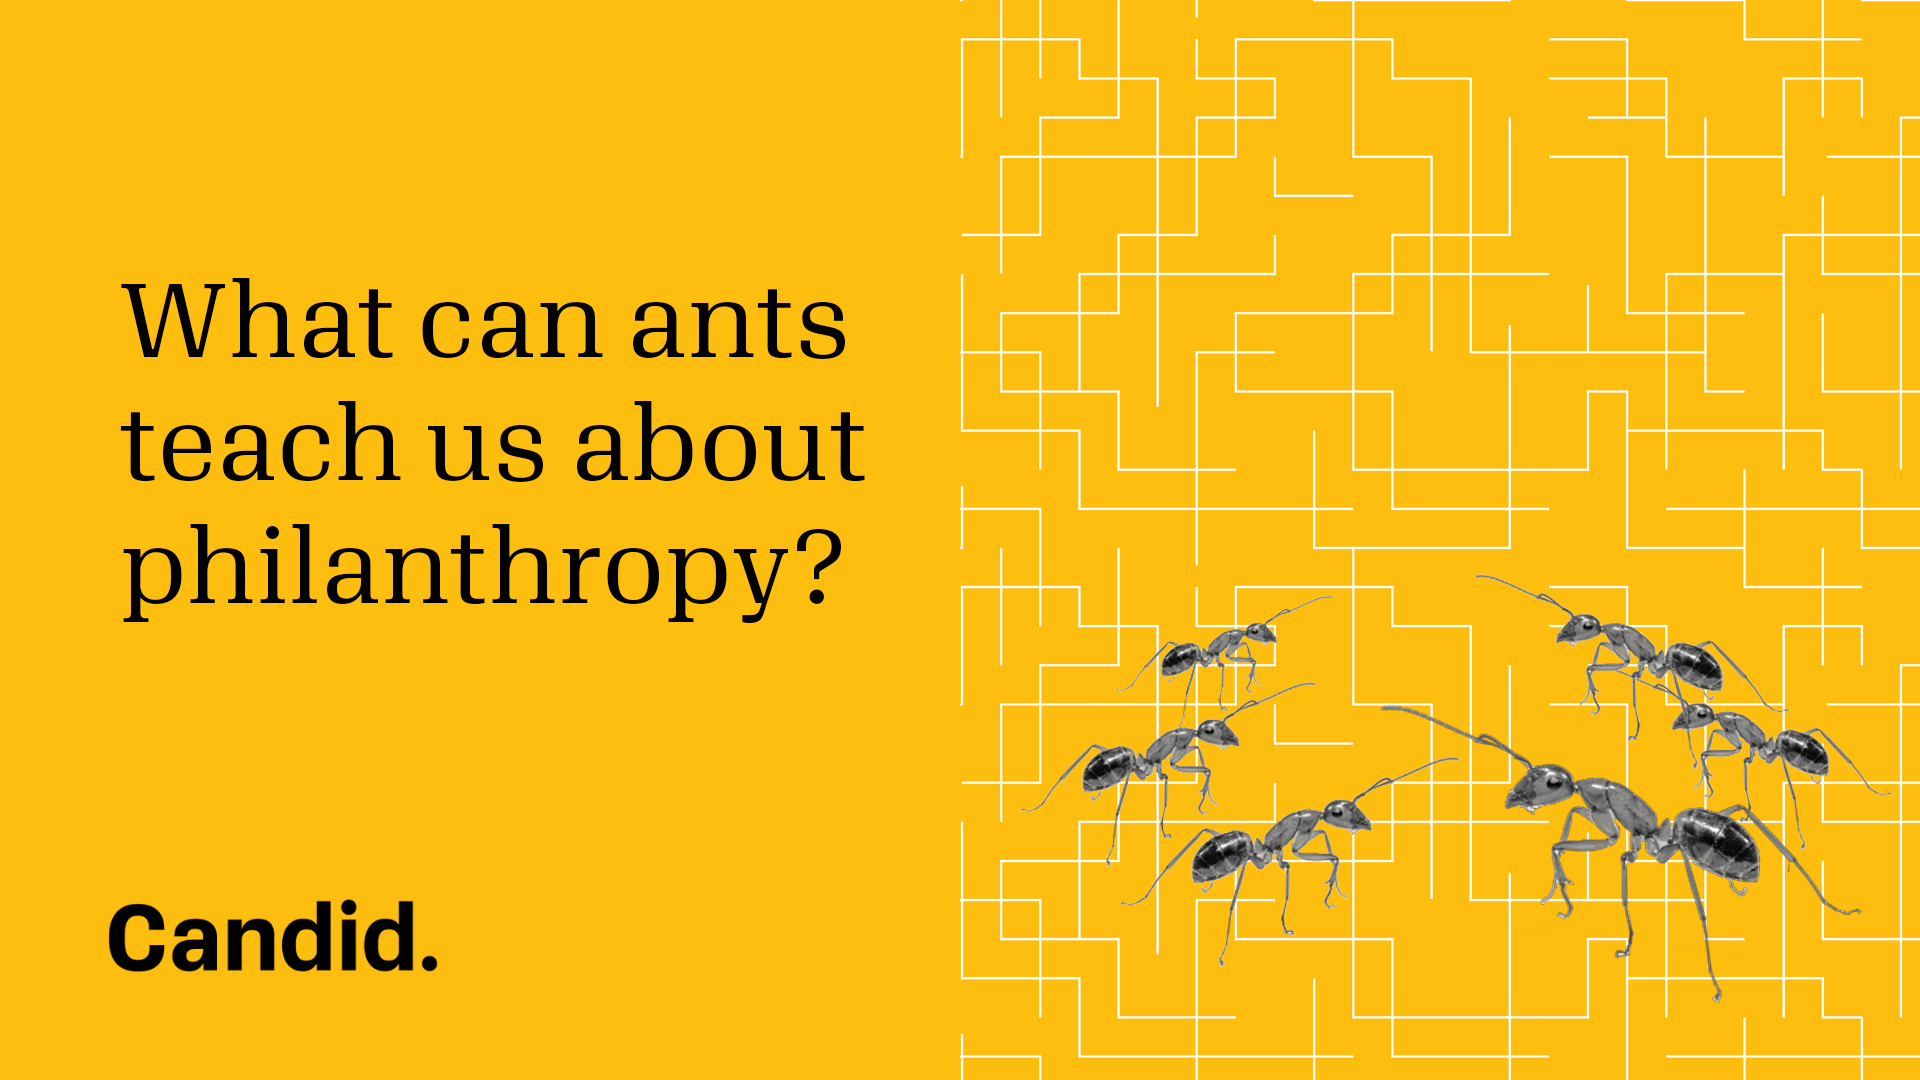 What can ants teach us about philanthropy?